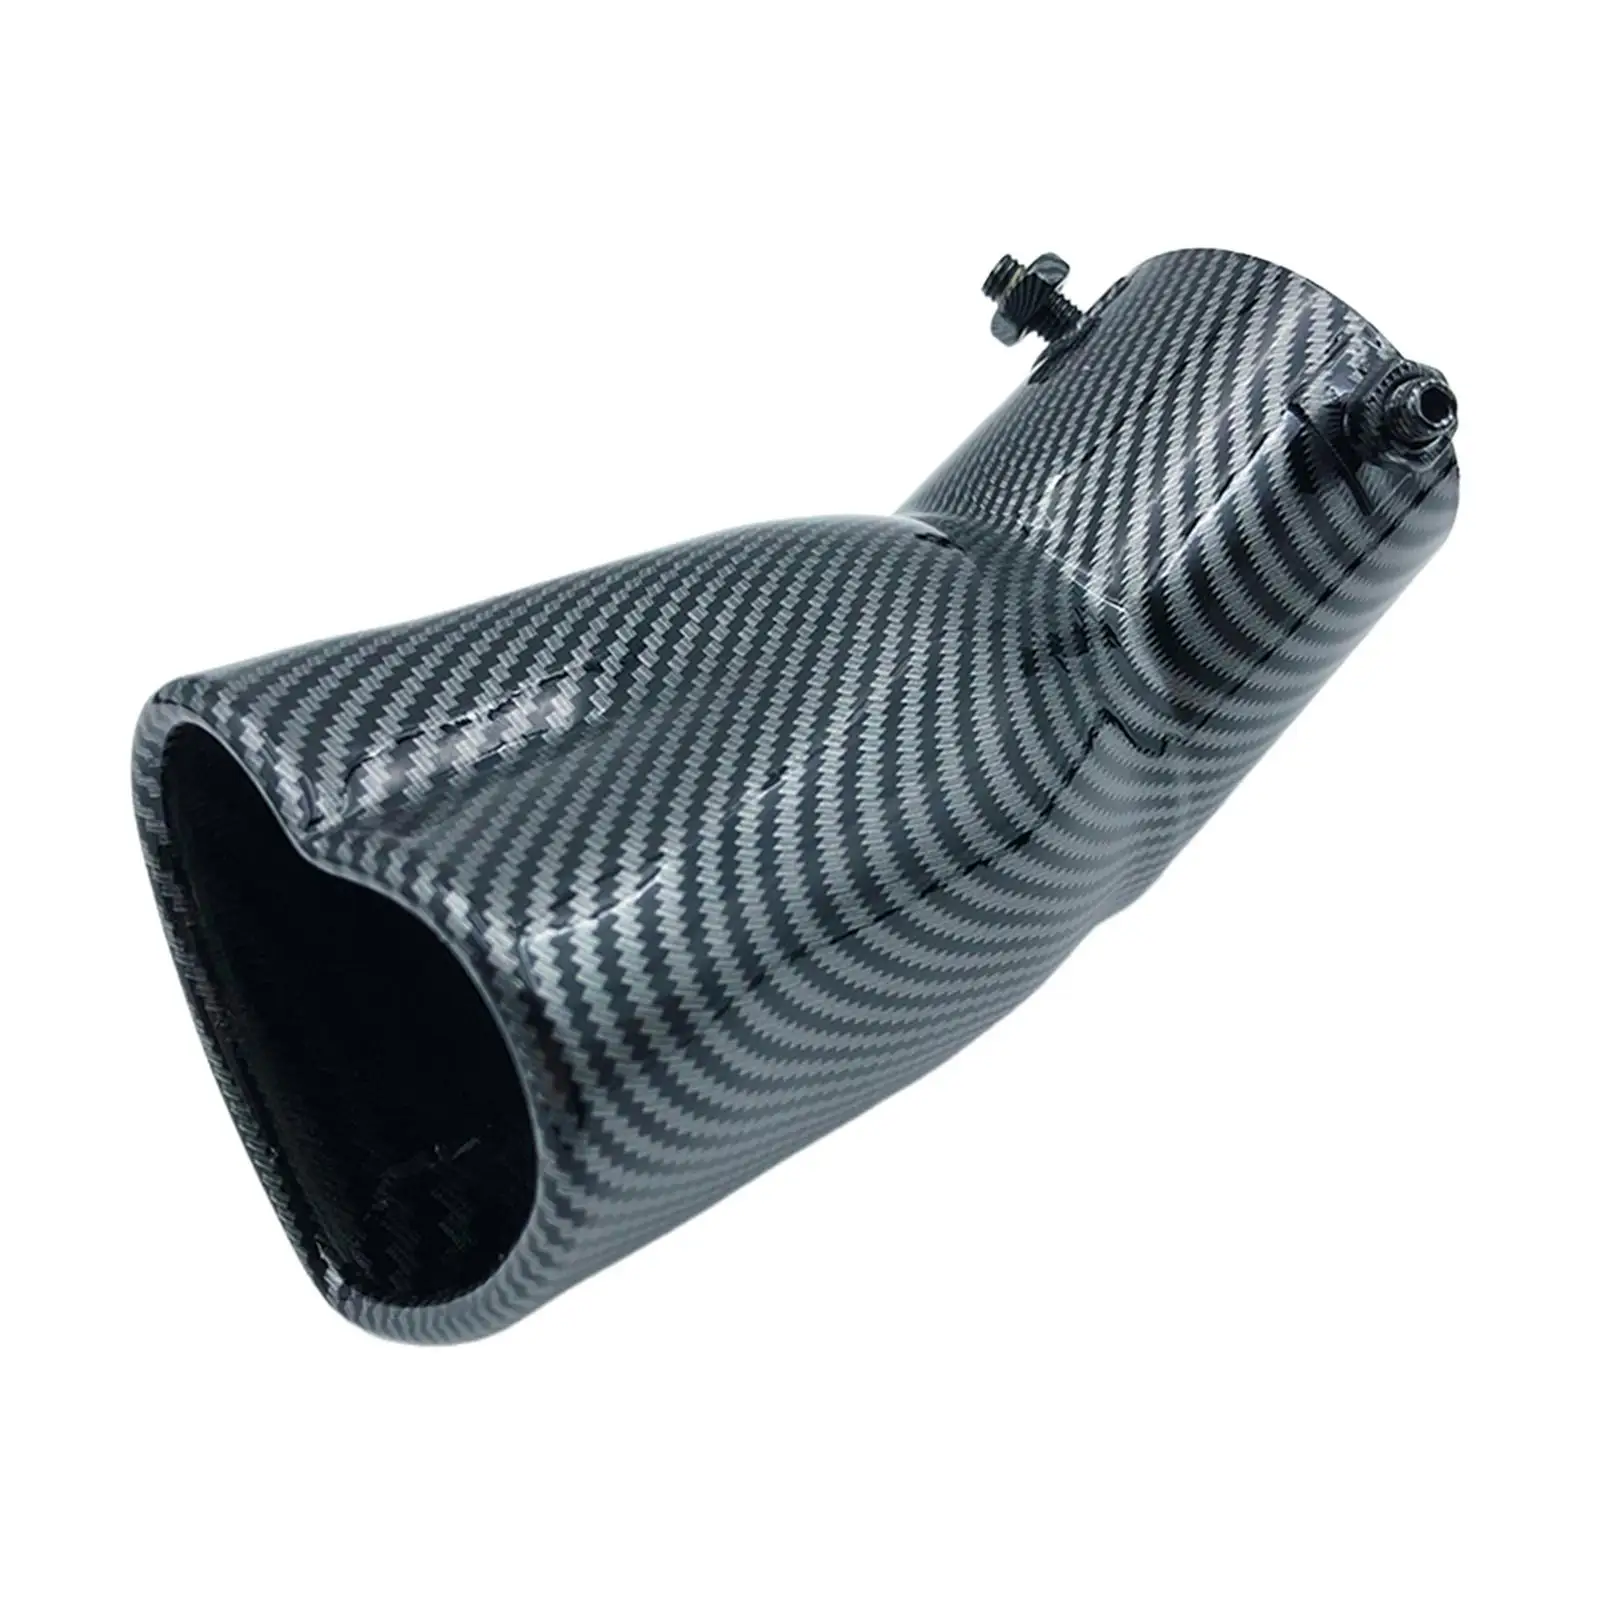 Car Modified Exhaust Pipe Sturdy Exhaust Muffler for Sedan Car Vehicles